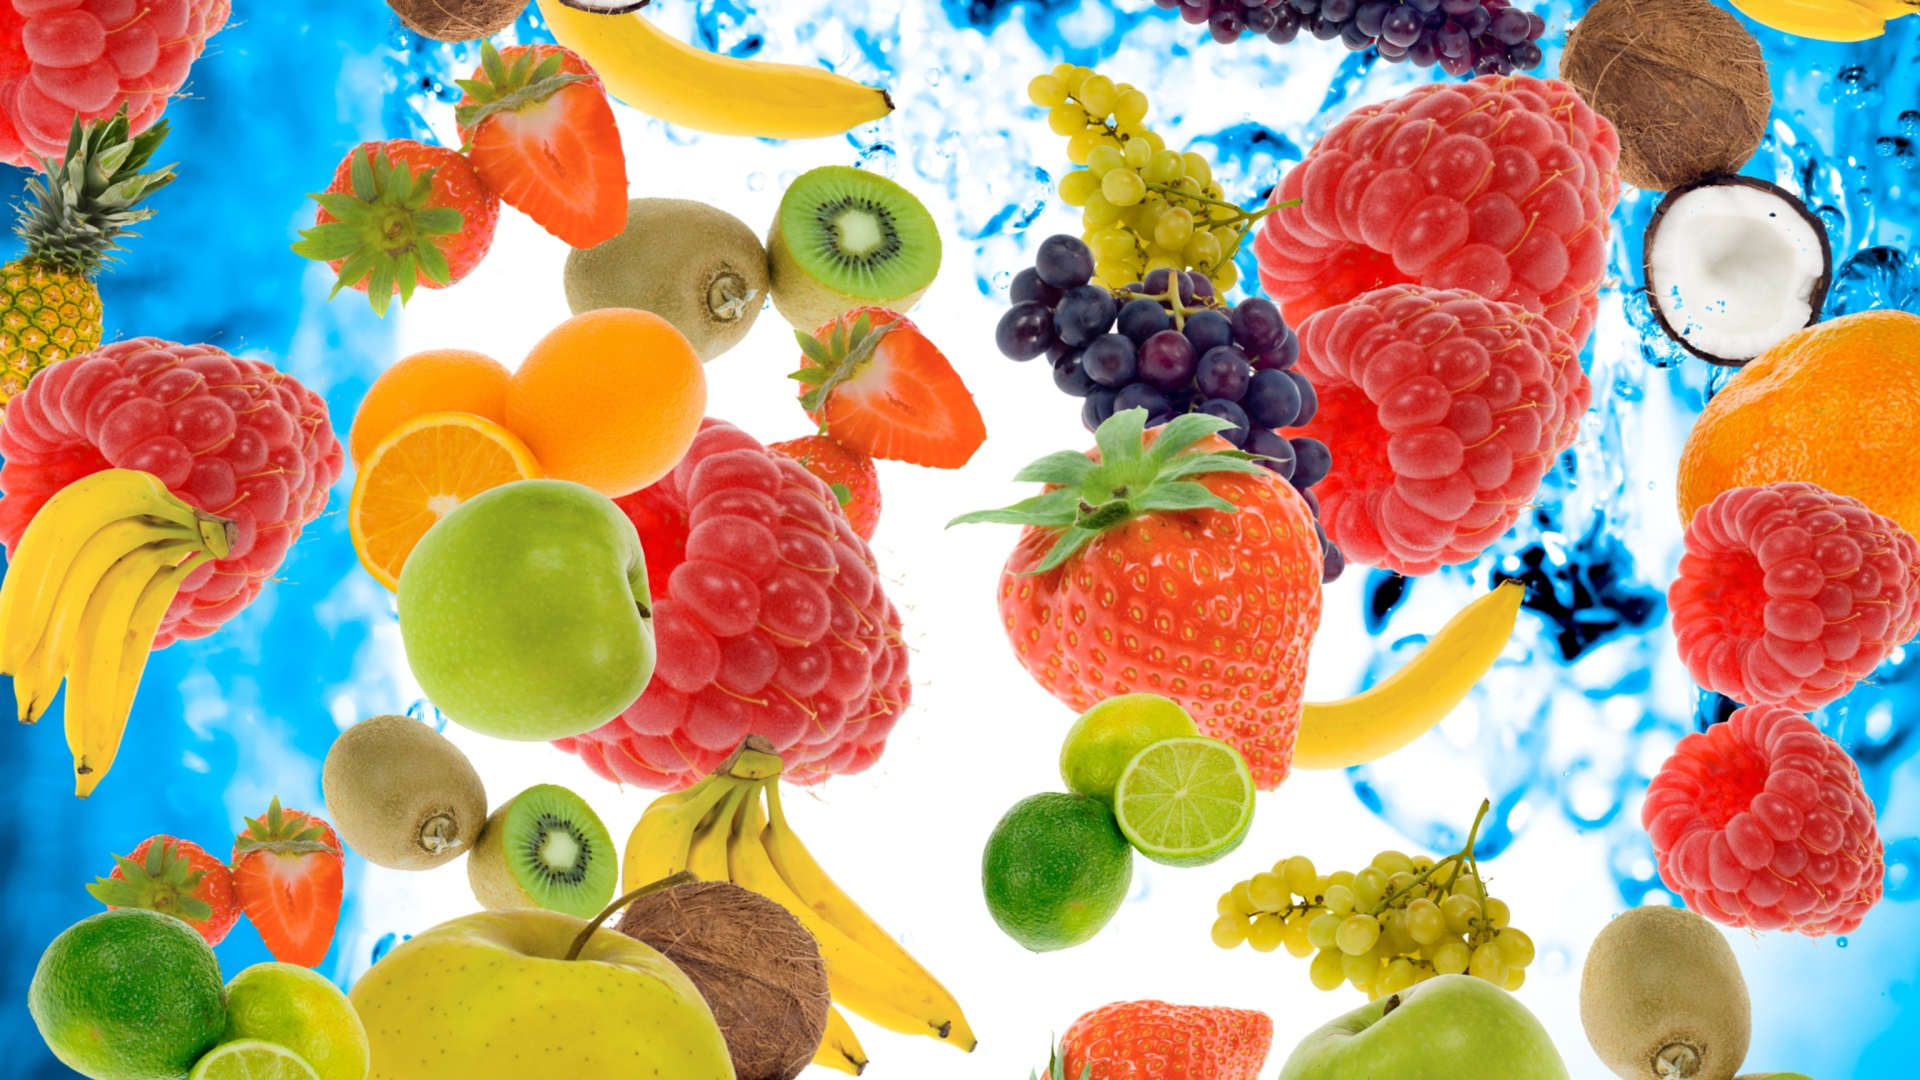 Berries And Fruits wallpaper 1920x1080